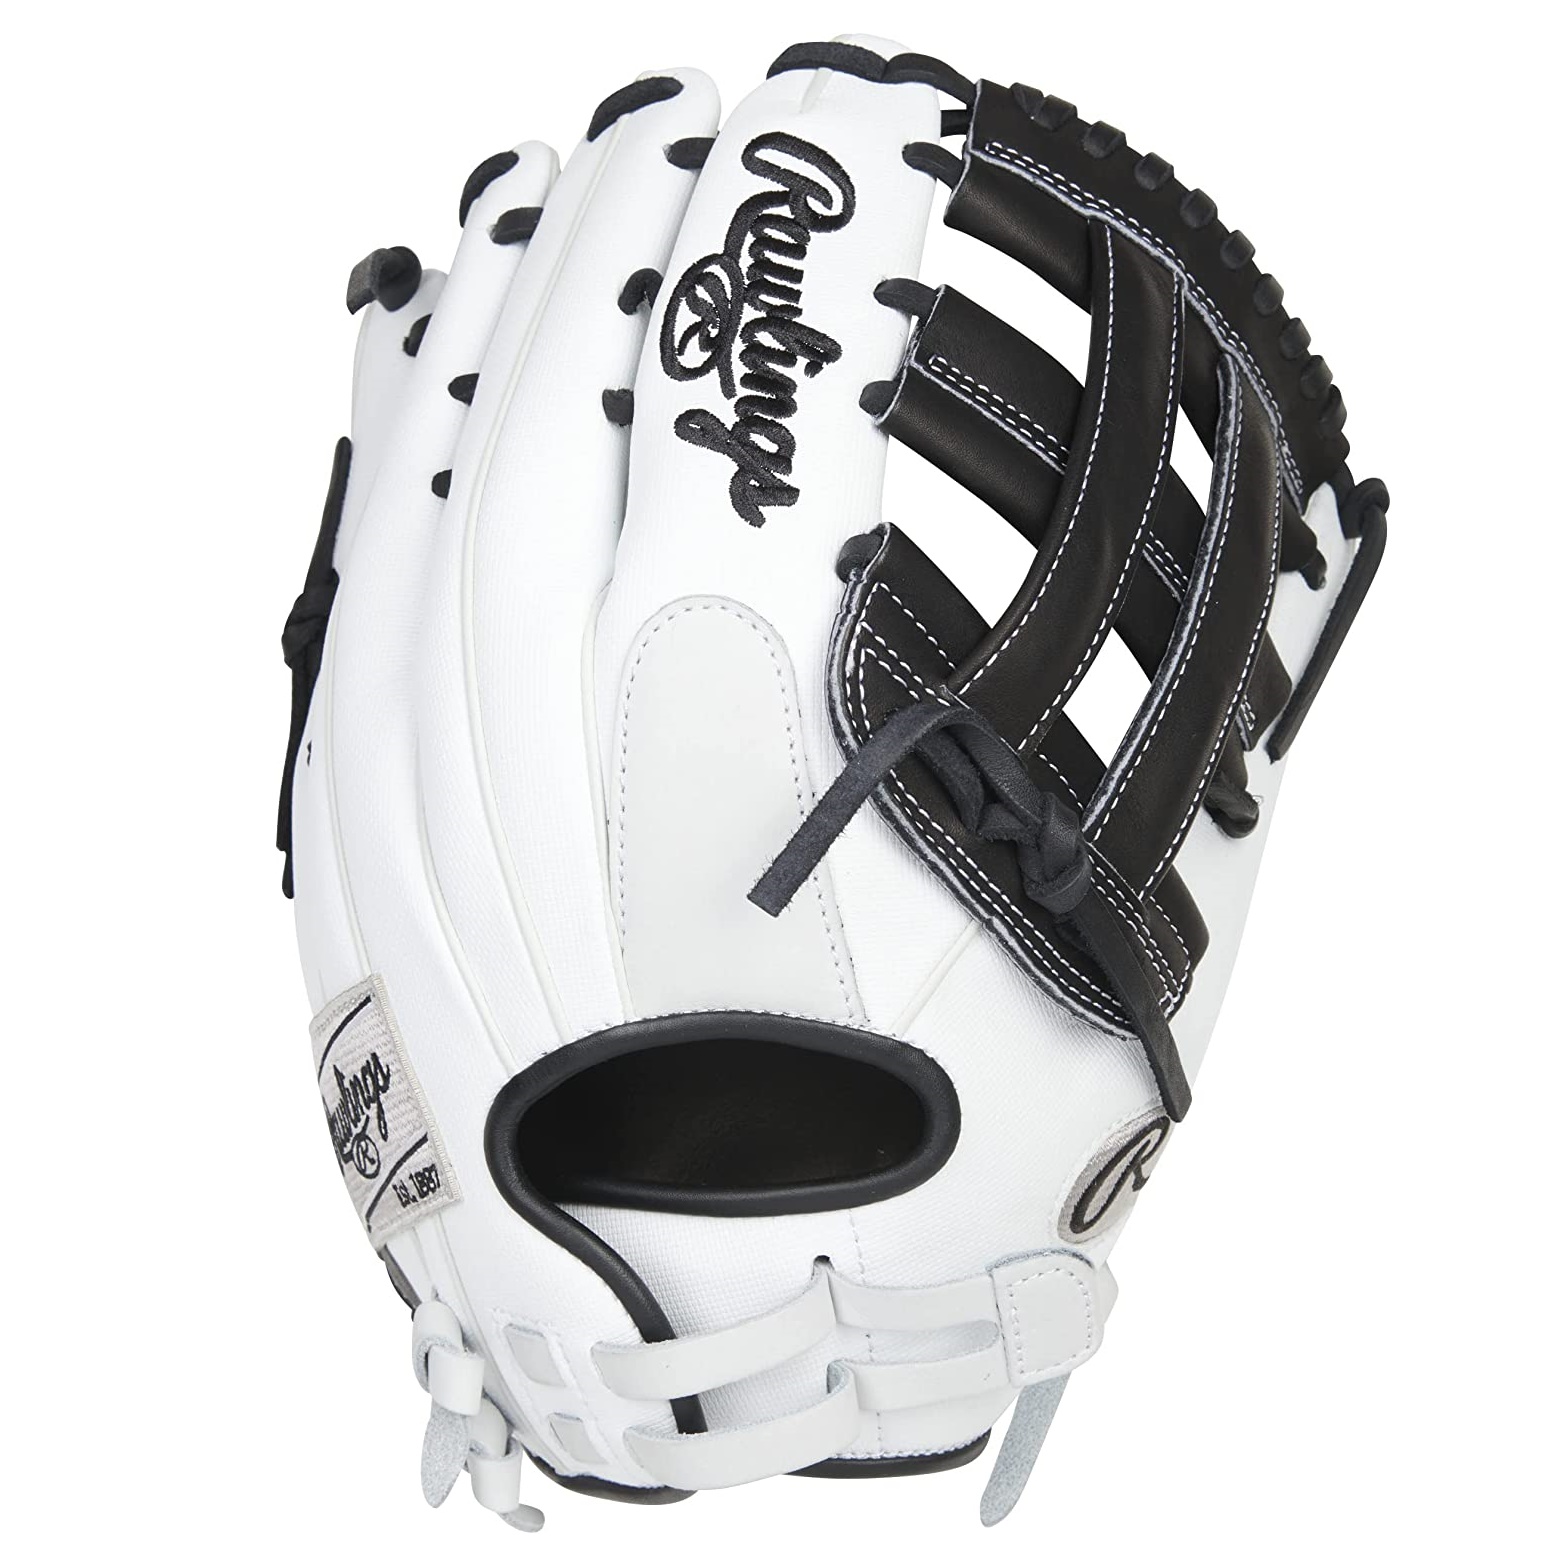 rawlings-heart-of-the-hide-softball-glove-12-75-white-black-right-hand-throw PRO1275SB-6BSS-RightHandThrow Rawlings  <p><span style=font-size large;>Unmatched performance comfort and durability come together with this